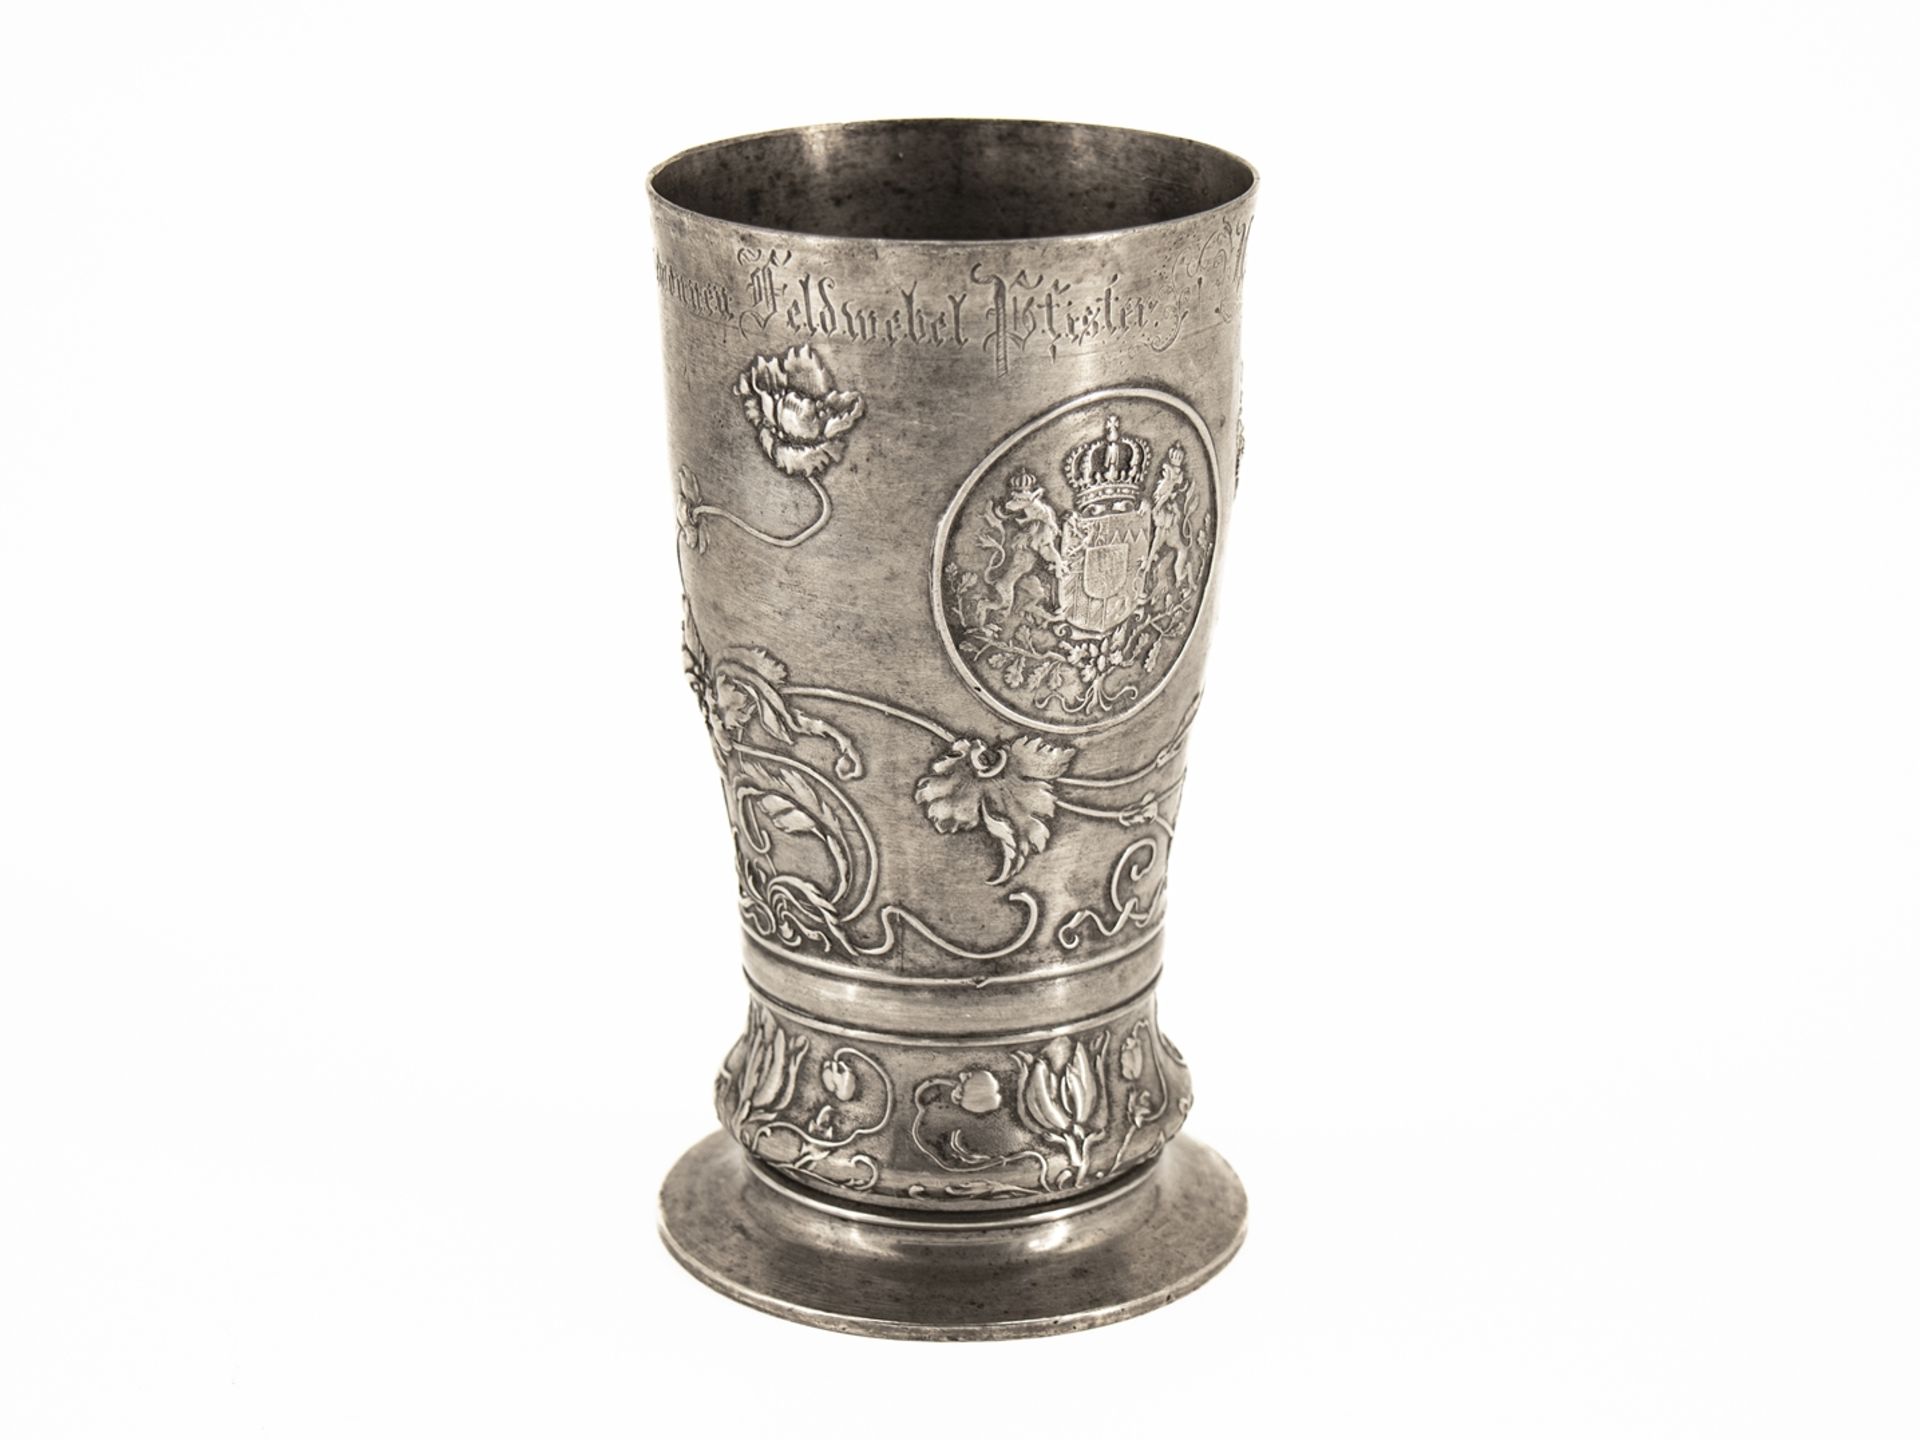 Rifleman's Cup NCO Prize Shooting, Art Nouveau, dated 1901. - Image 3 of 6